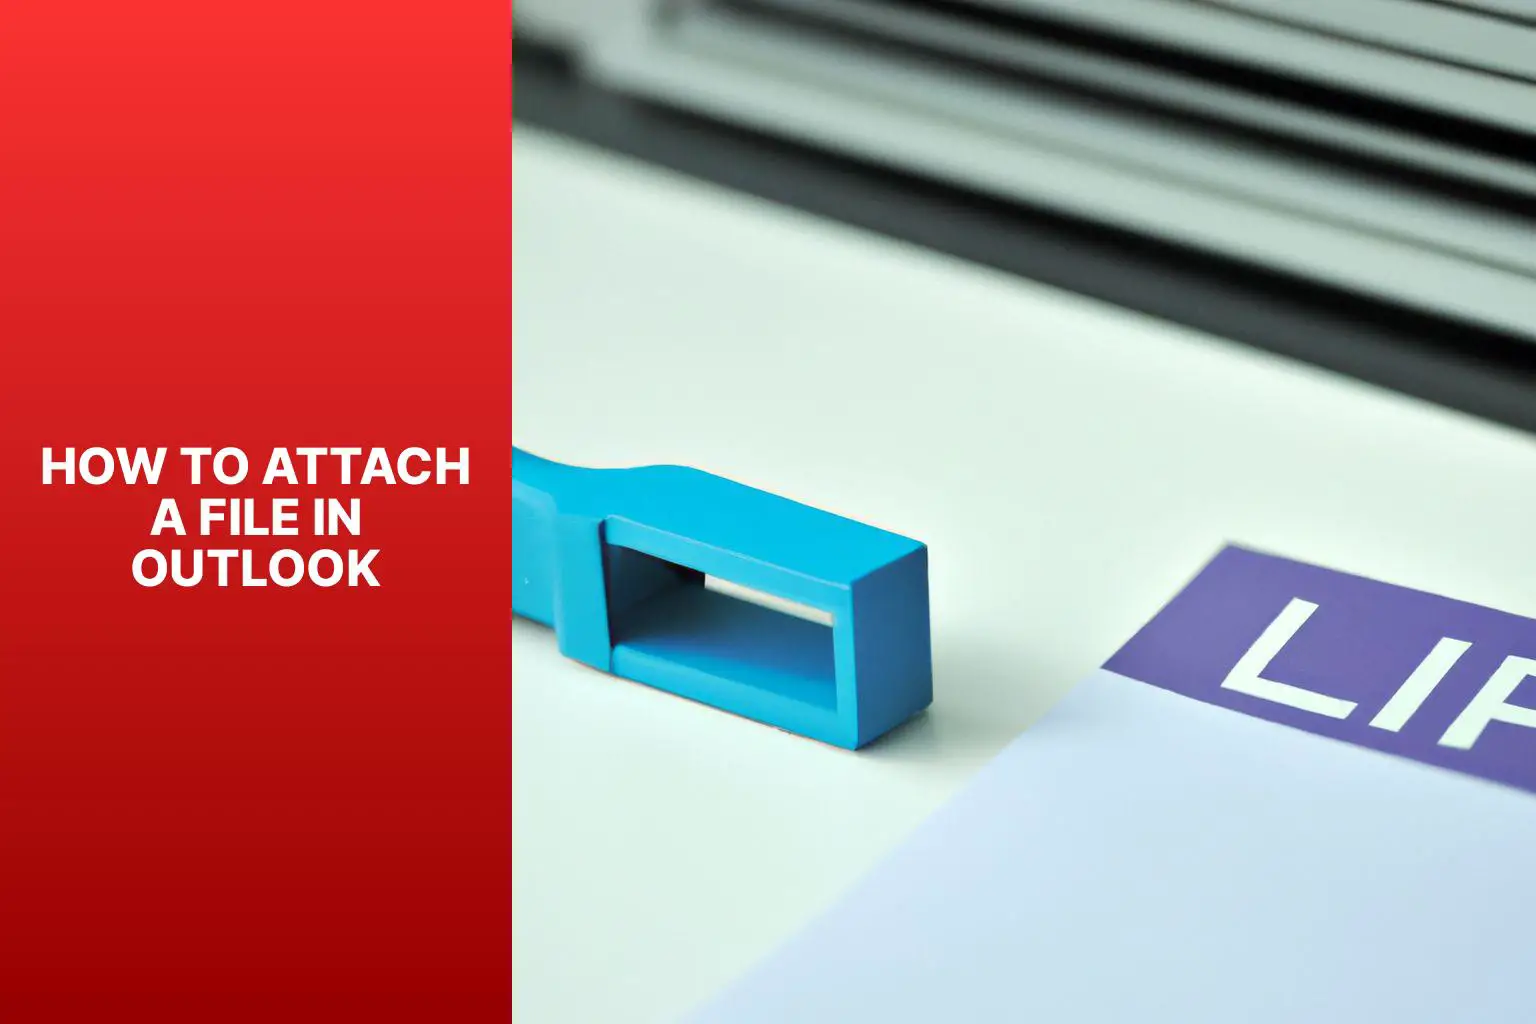 Learn How to Easily Attach a File in Outlook with Step-by-Step Instructions